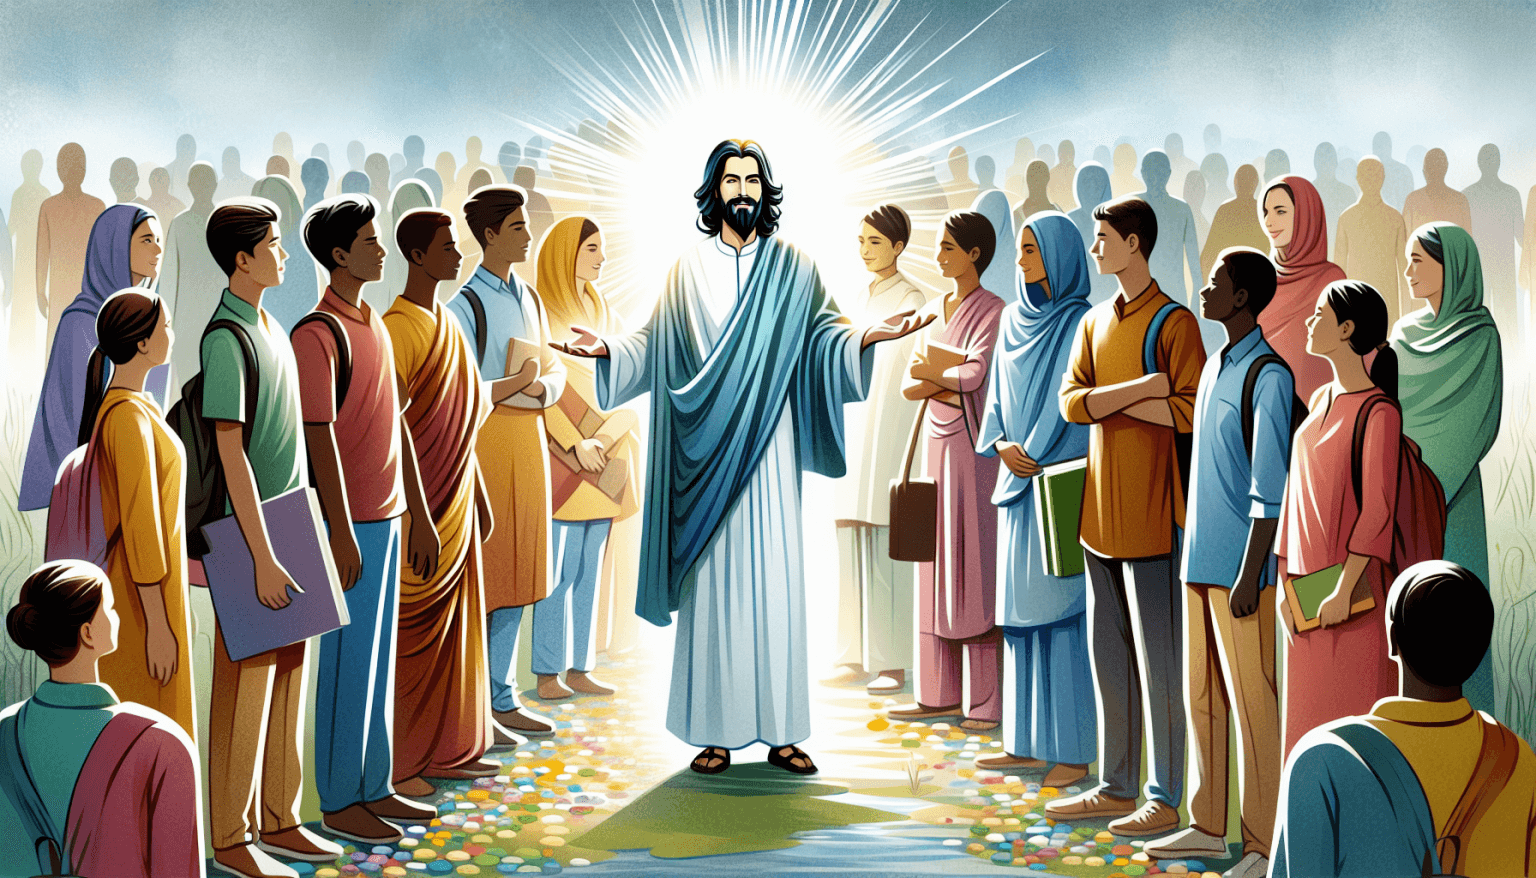 Create an image depicting Jesus standing with his disciples, with a radiant light shining around him. Each disciple is looking at Jesus with a mix of awe and reverence. Jesus is holding out his hand t